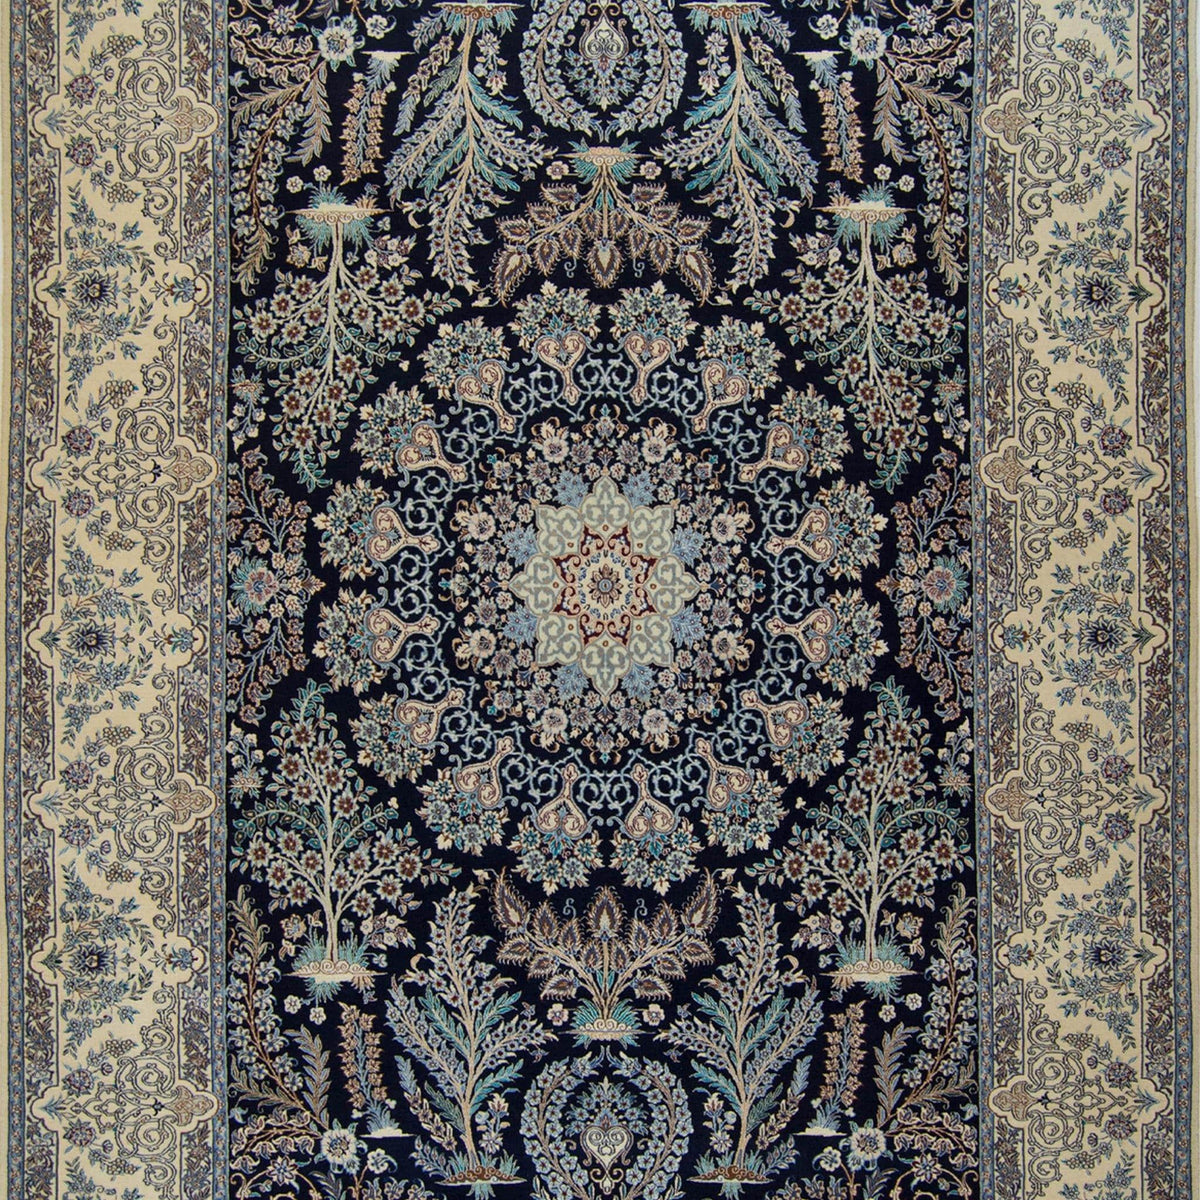 Genuine Super Fine Hand-knotted Persian Wool &amp; Silk Nain Rug (SIGNED HABIBIAN )